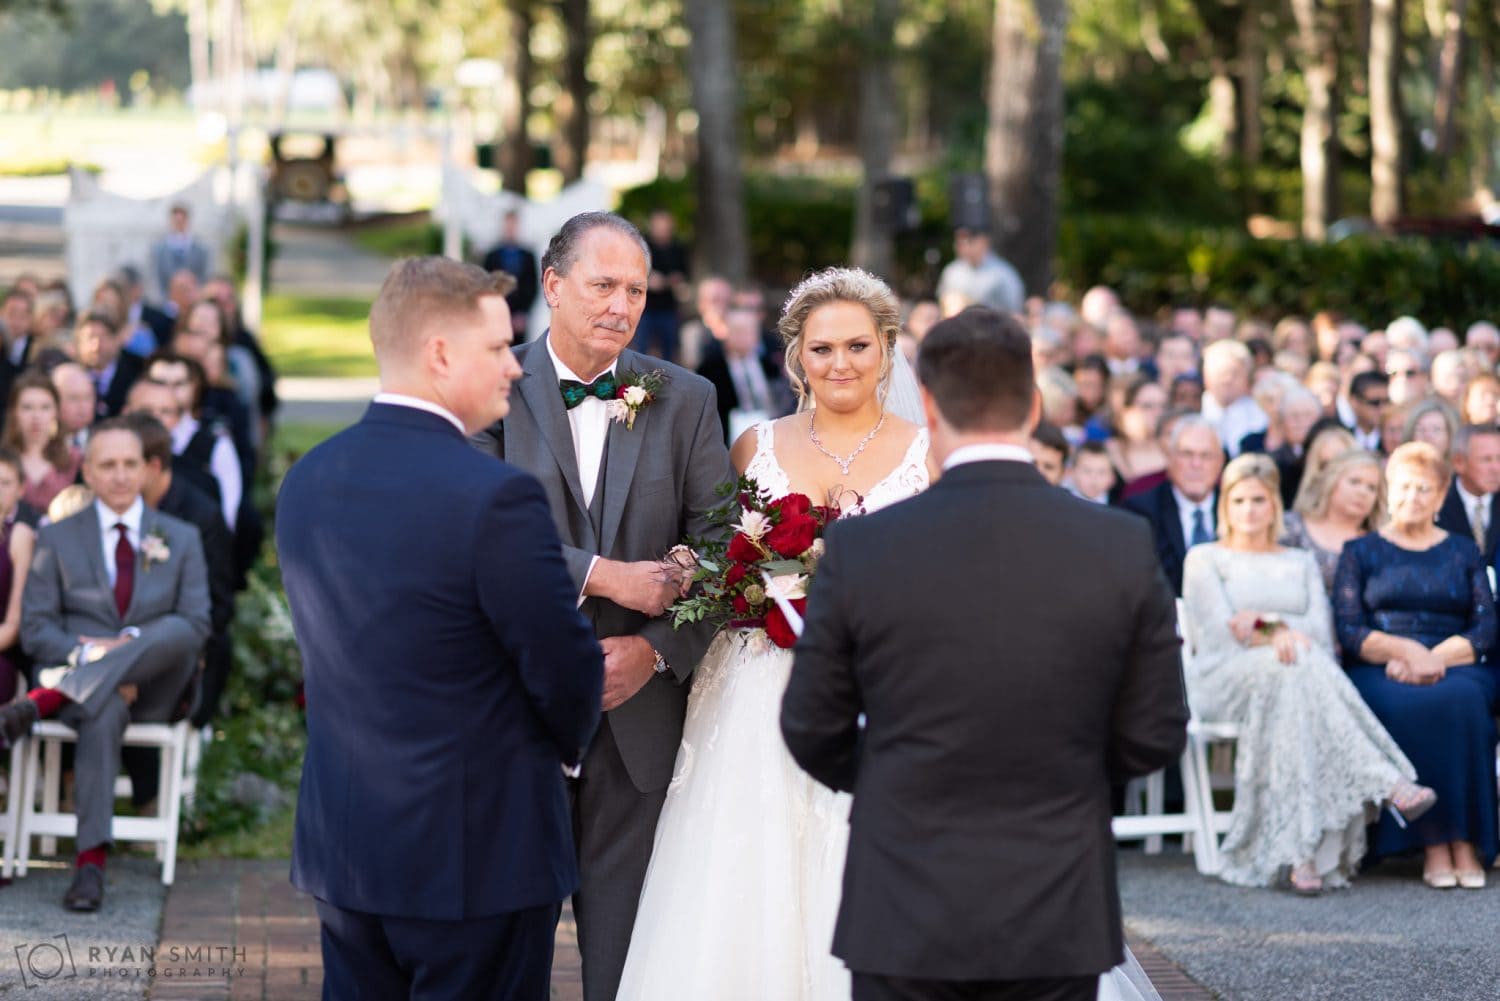 Ceremony on the front lawn